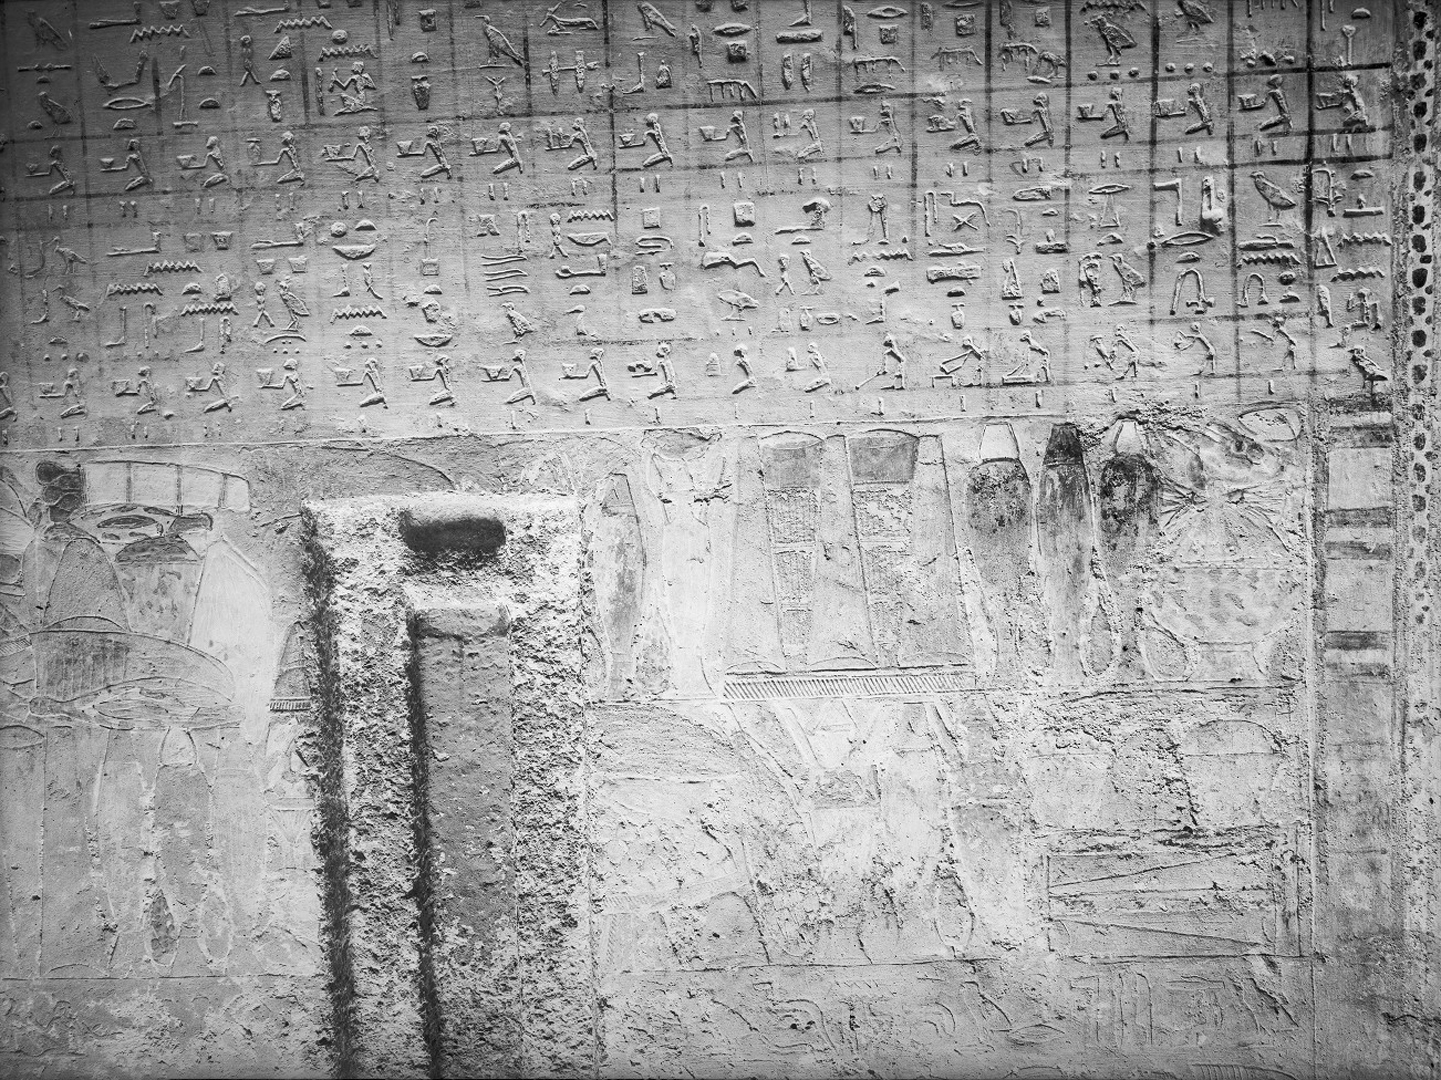 Mastaba Complex of Idu - Section 3.7 - West Wall, North of Niche 2